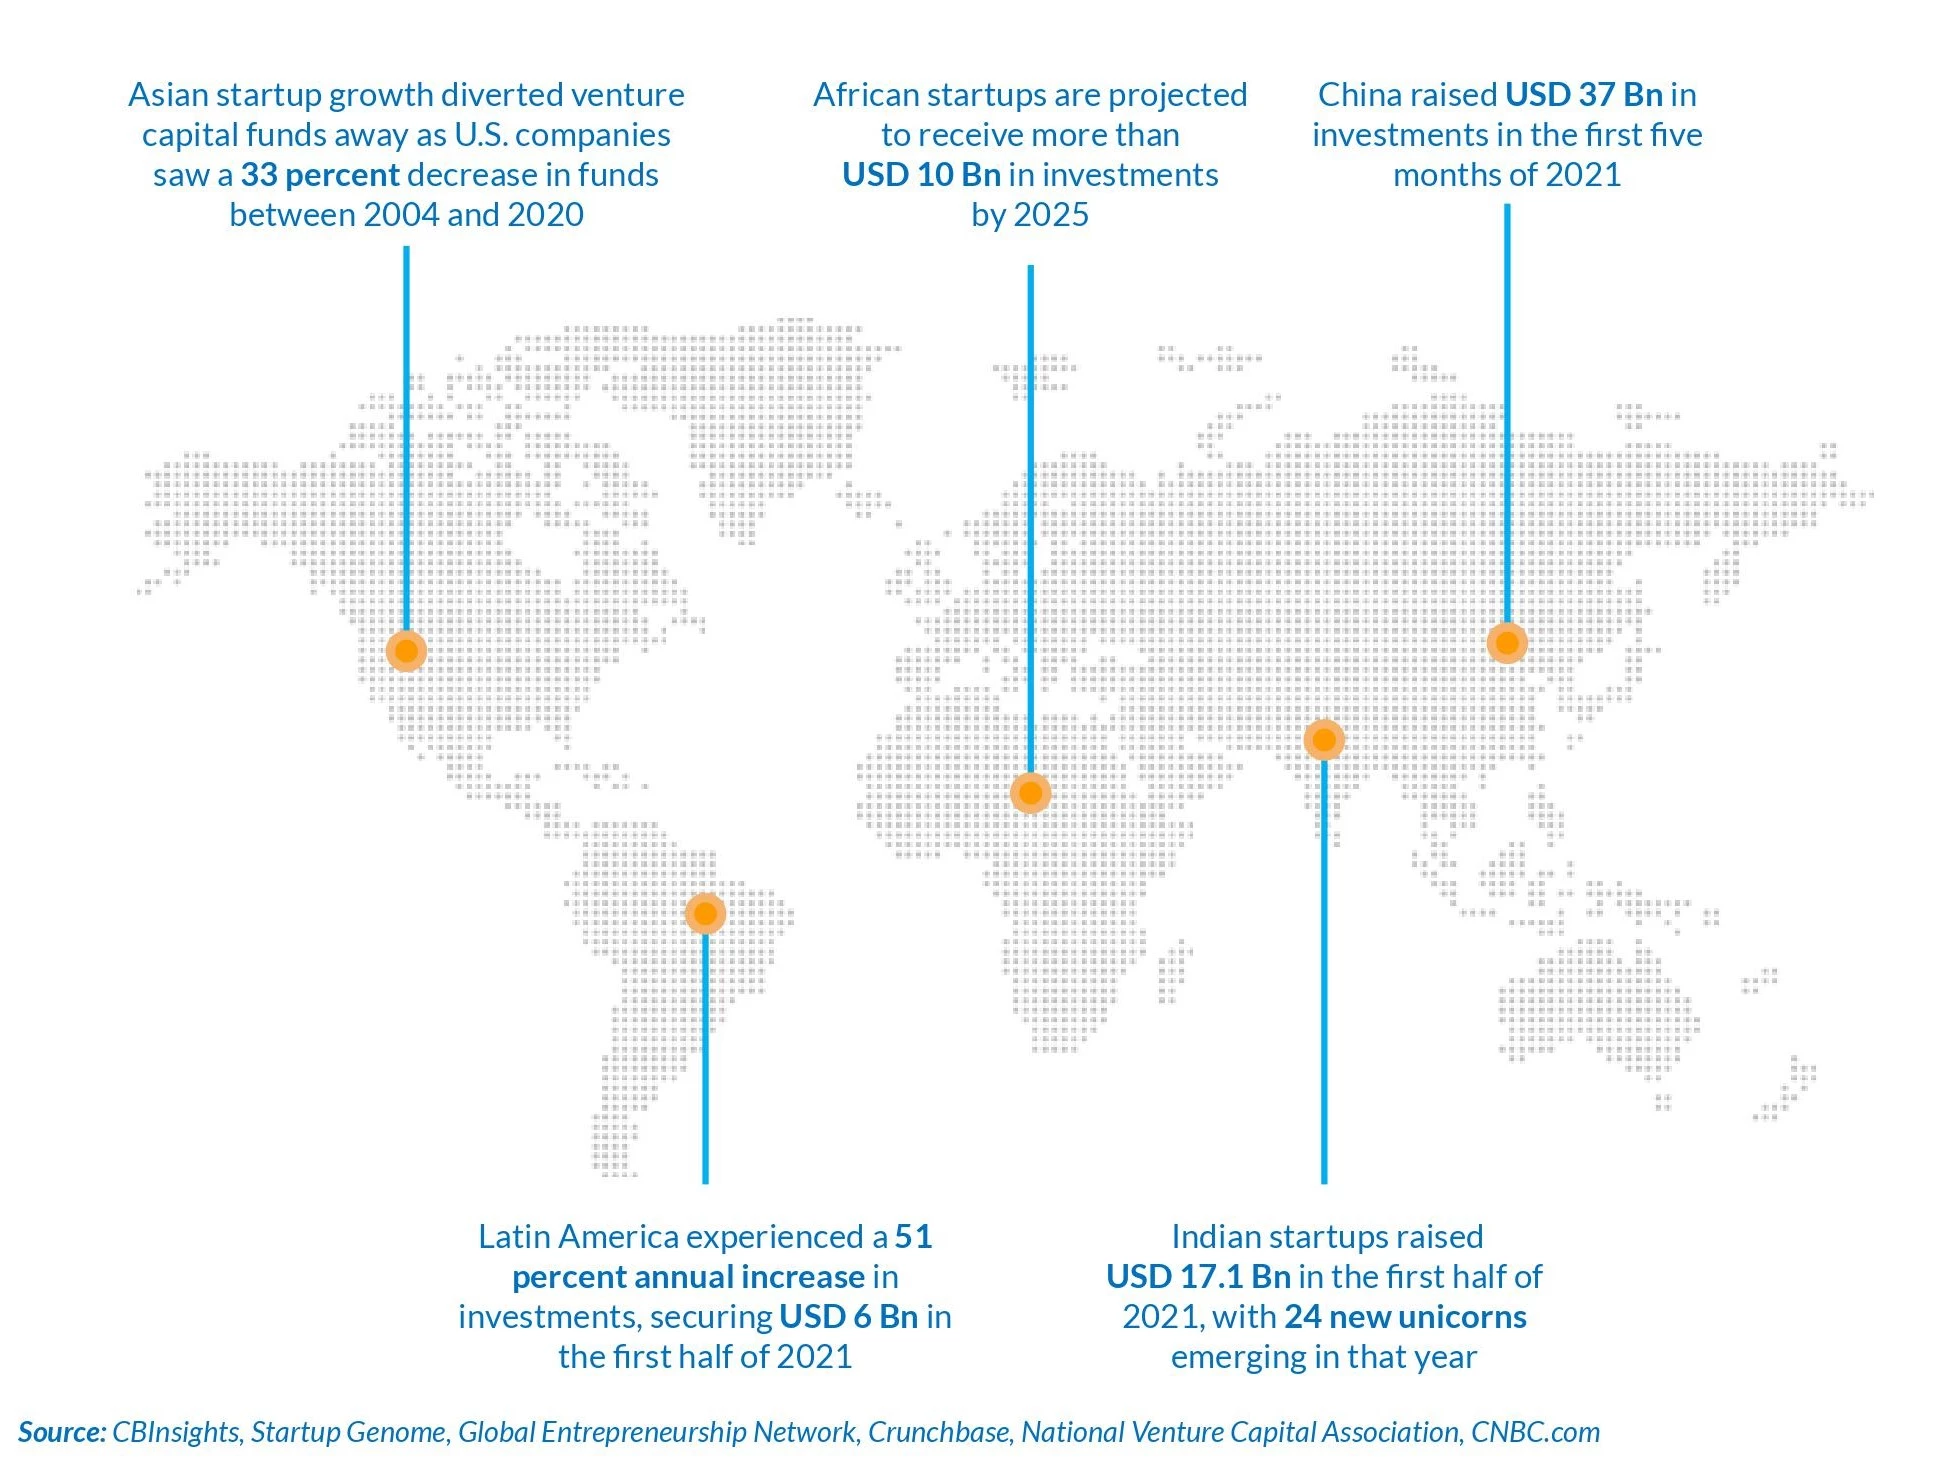 Startup Growth Has Been Taking off All Over the World With Asian Startups Increasingly Gaining Global Traction